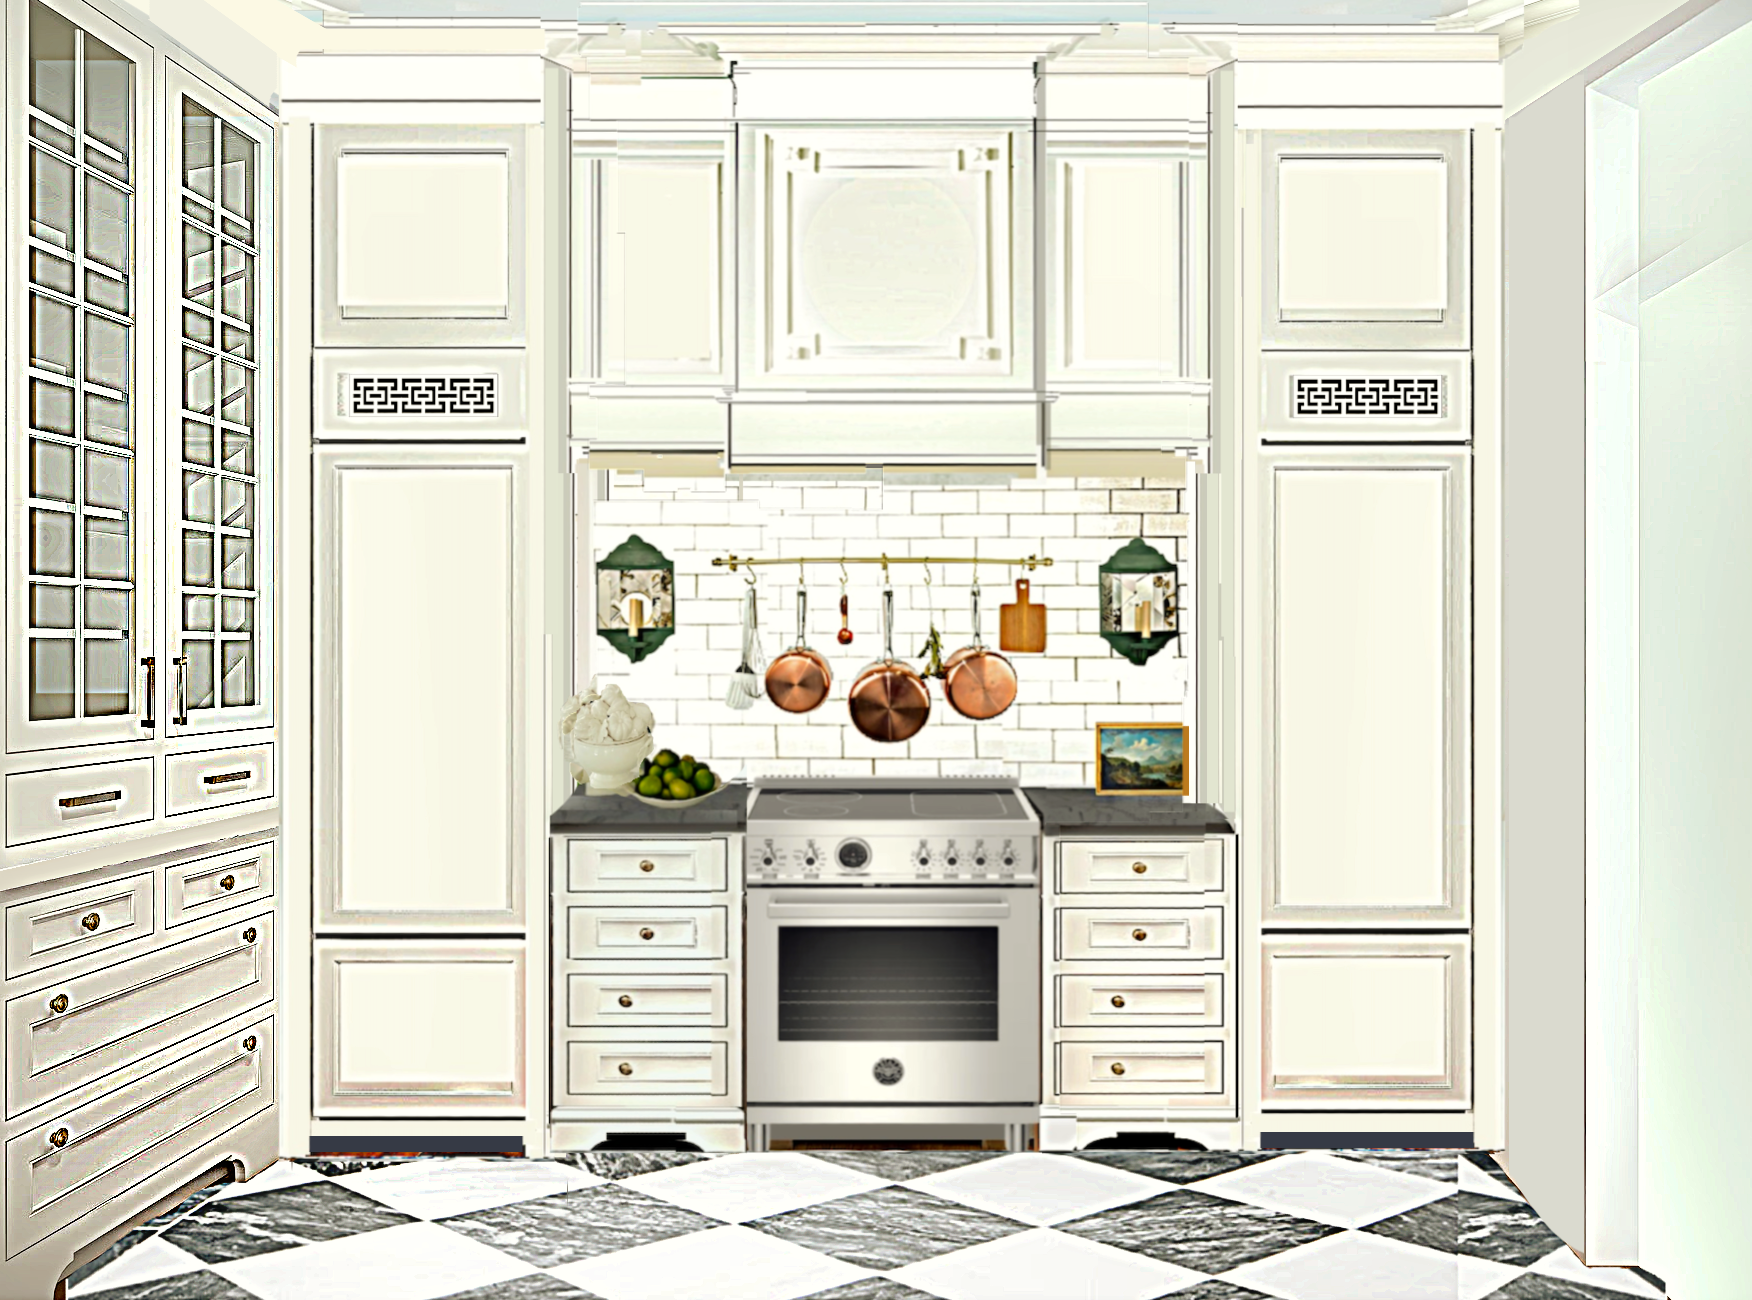 range wall - pantry soapstone counter counter French hood with Victorian coving crown pantry and refrigerator on one wall new vent cover 3.8.23